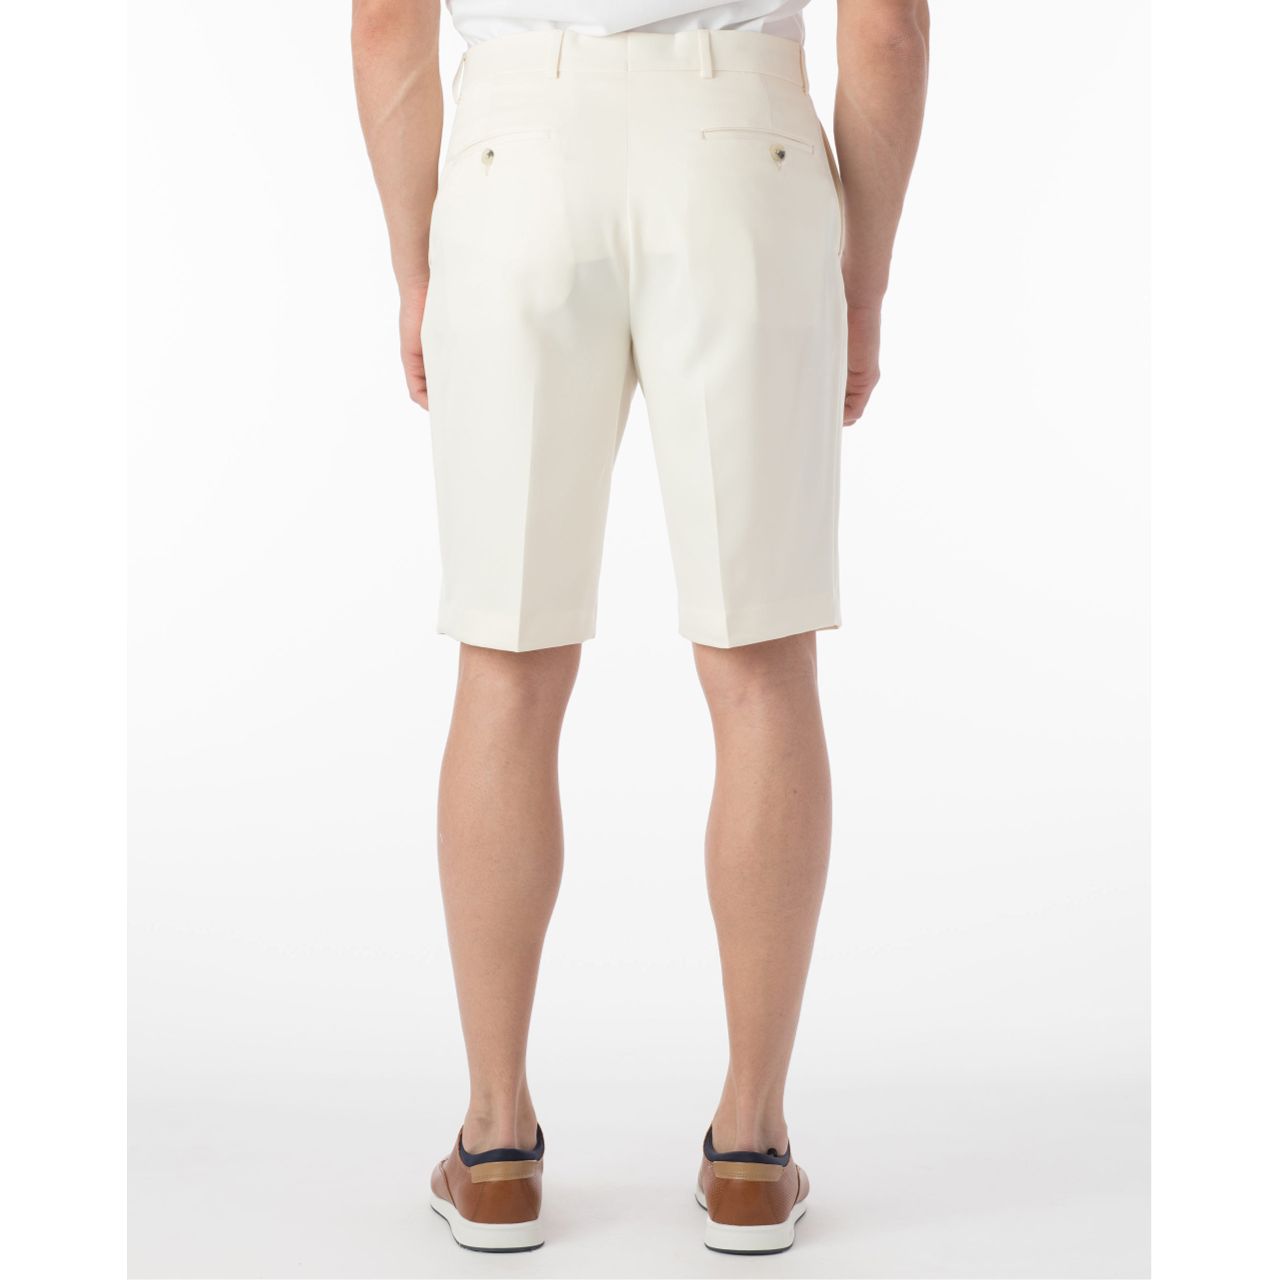 Micro Nano Travel Twill Performance Gabardine Plain Front Shorts in Oyster (Size 37) by Ballin